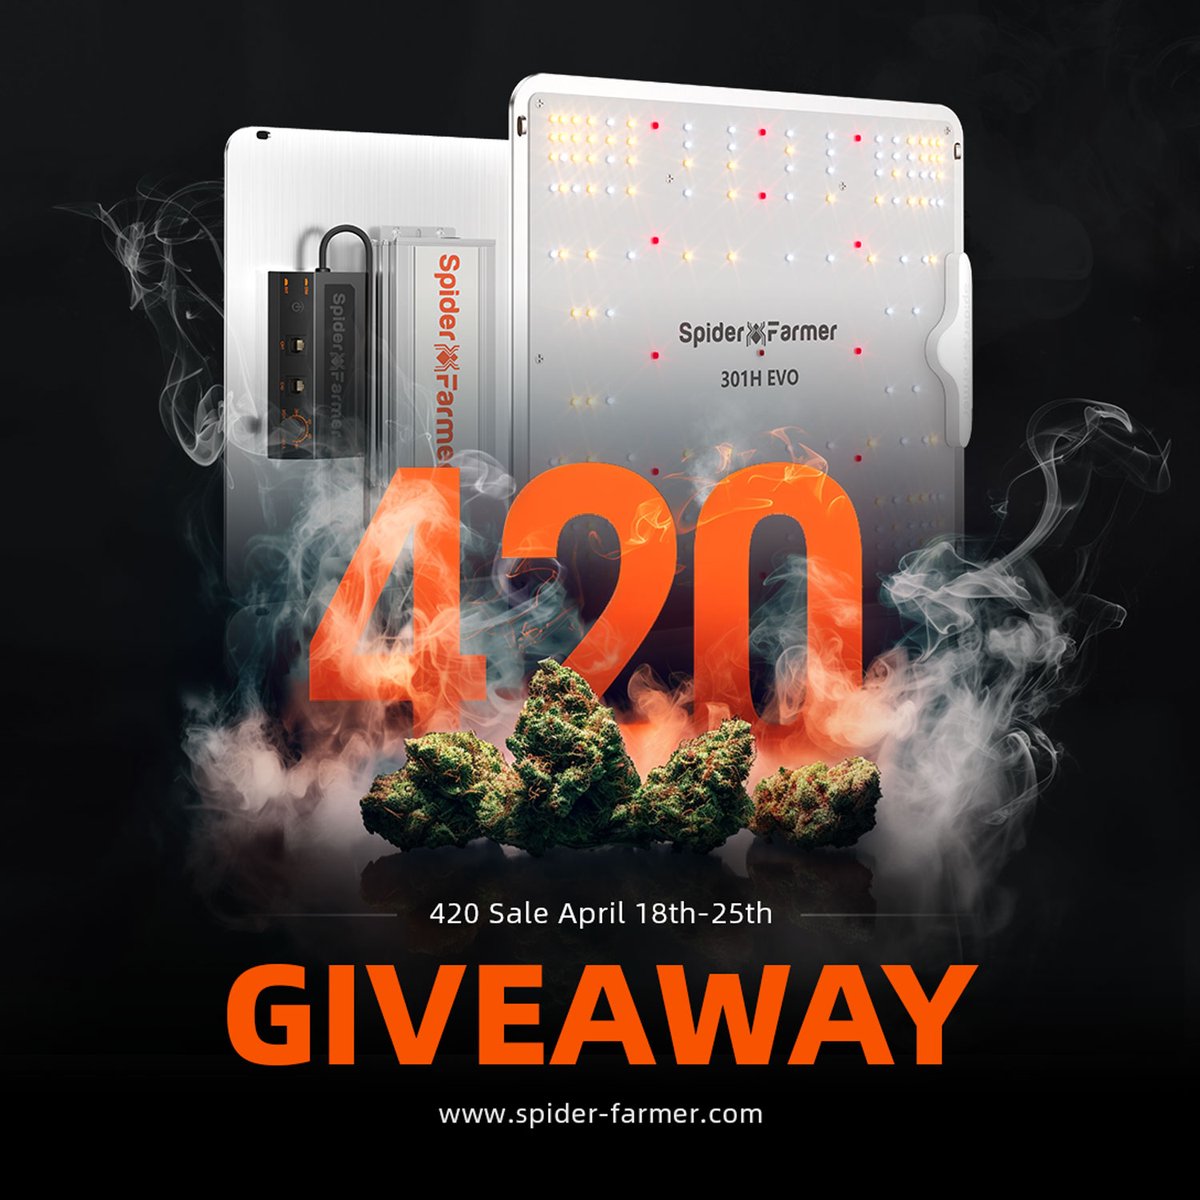 🥳Spider Farmer 420 is here! From April 18-25, Save up to 20% on select products. A new 420 GIVEAWAY is here! 🎁Prize: SF1000 EVO RULE: 1⃣Follow us 2⃣Like & RT 3⃣Turn MY noti on 4⃣Tag 3 friends Deadline：4.30 🤞Good luck! spider-farmer.com #spiderfarmer420 #Giveaway